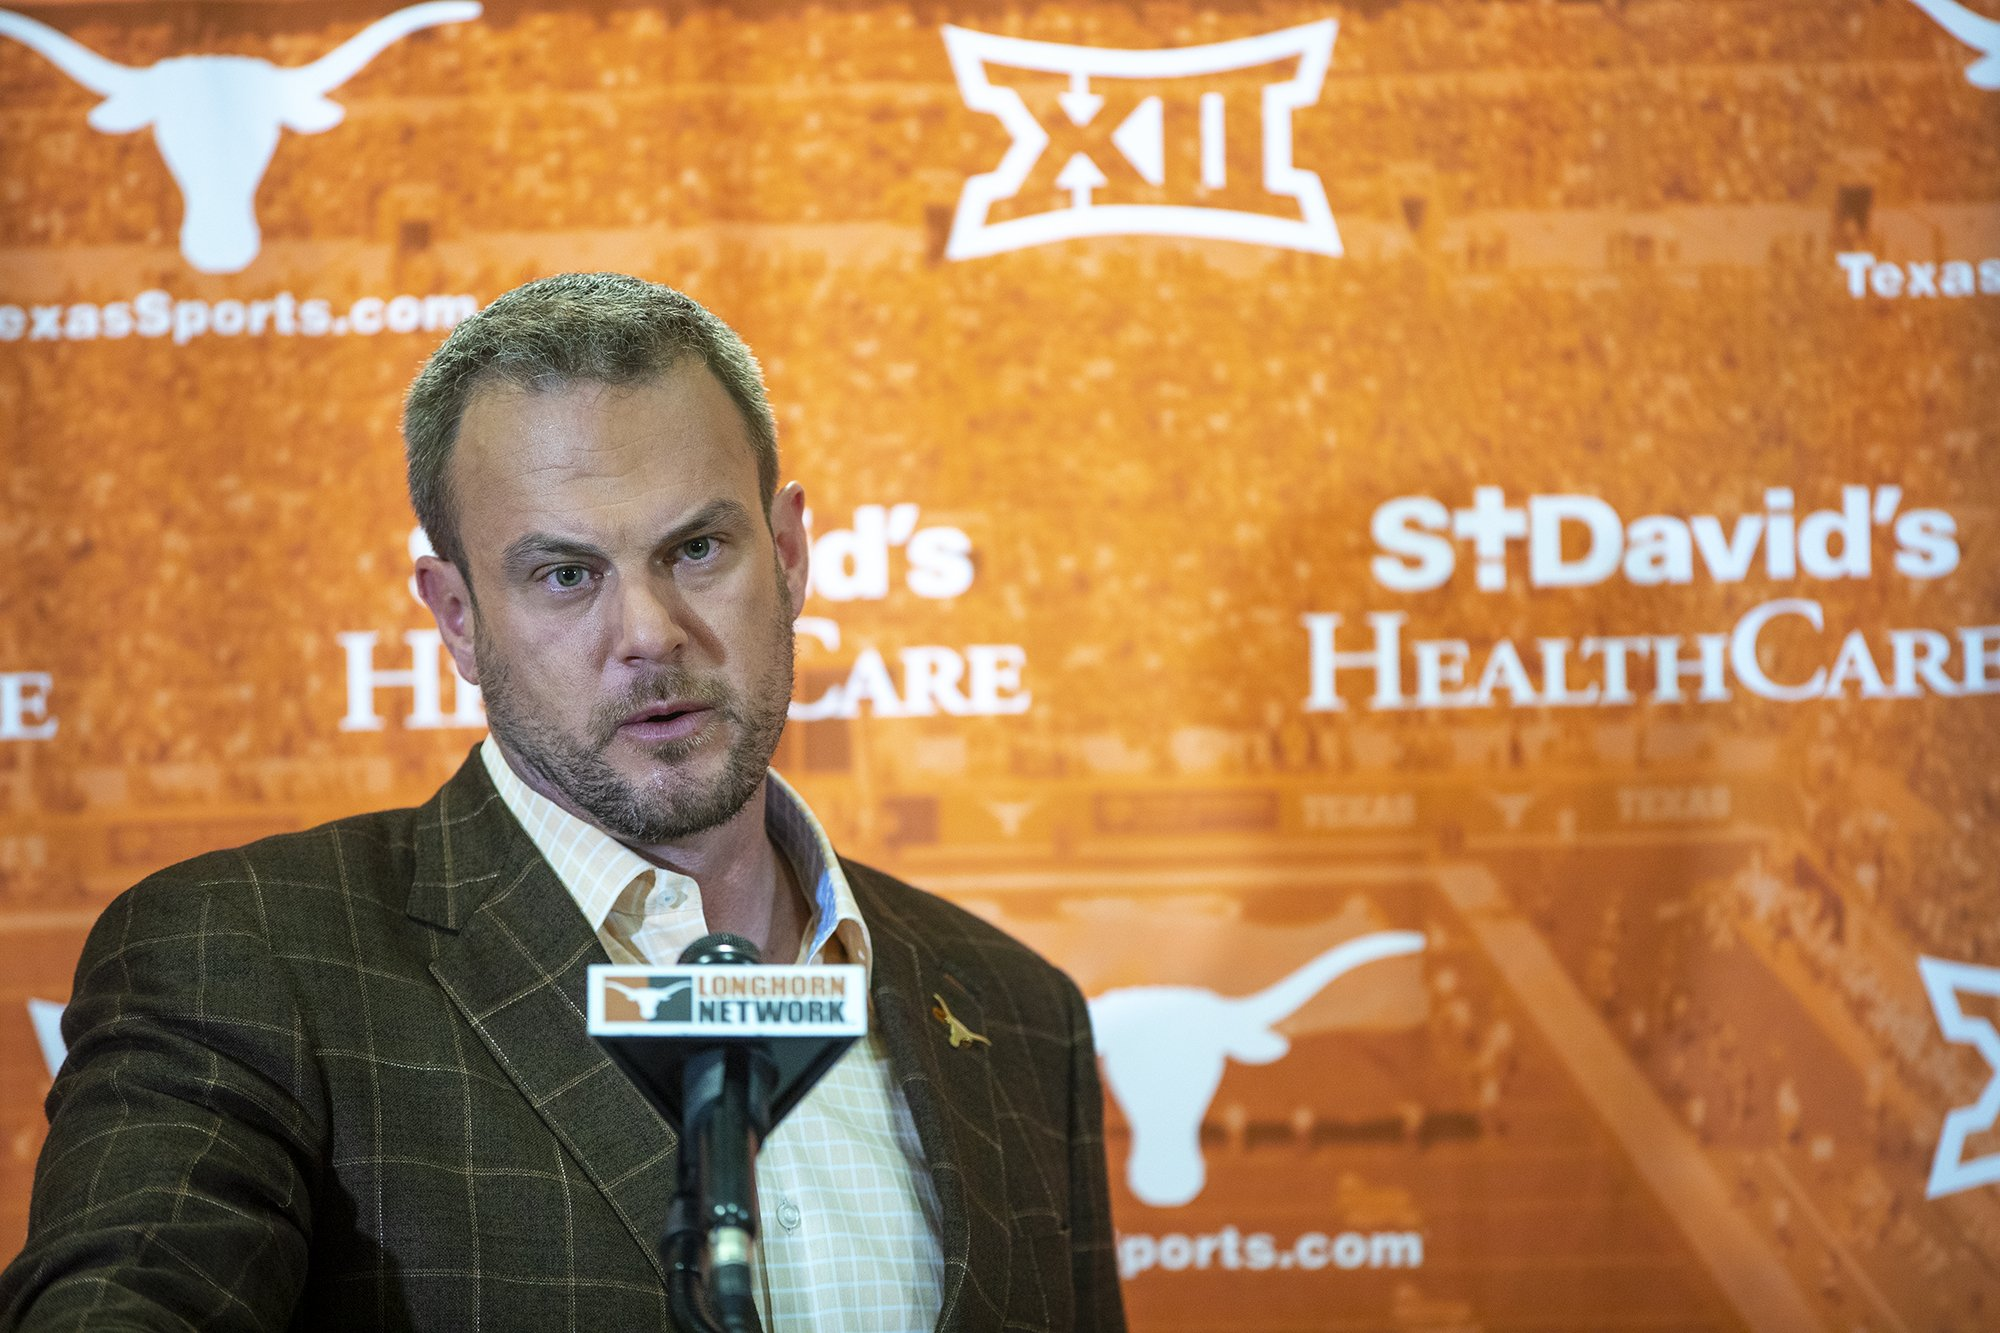 LISTEN: Texas coach Tom Herman discusses roster movement, new coaching staff